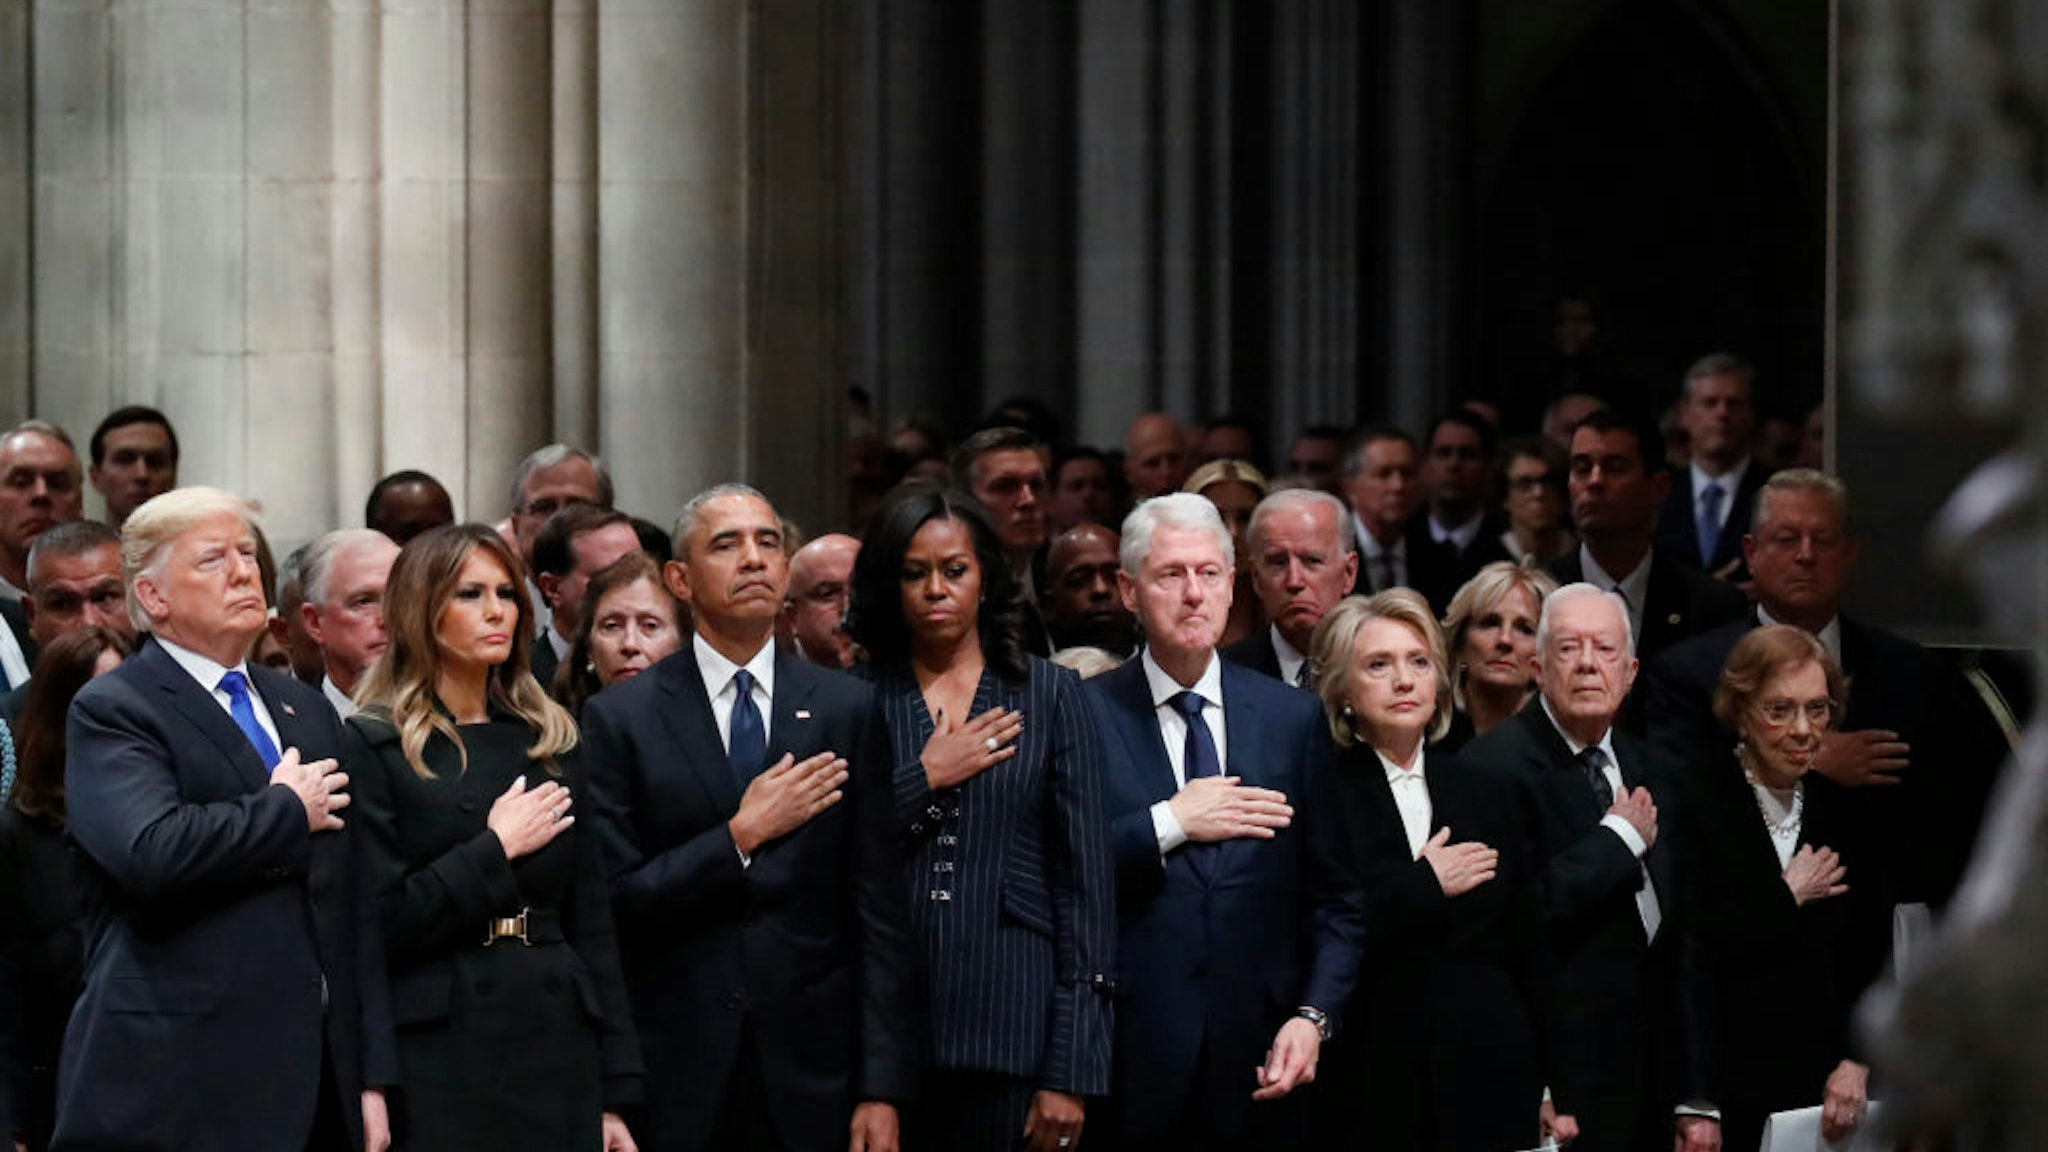 WASHINGTON, DC - DECEMBER 05: (AFP OUT) From left, President Donald Trump, first lady Melania Trump, former President Barack Obama, former first lady Michelle Obama, former President Bill Clinton, former Secretary of State Hillary Clinton, and former President Jimmy Carter and former first lady Rosalynn Carter attend the state funeral of former U.S. President George H. W. Bush at the Washington National Cathedral on December 5, 2018 in Washington, DC. President Bush will be buried at his final resting place at the George H.W. Bush Presidential Library at Texas A&amp;M University in College Station, Texas. A WWII combat veteran, Bush served as a member of Congress from Texas, ambassador to the United Nations, director of the CIA, vice president and 41st president of the United States. (Photo by Alex Brandon - Pool/Getty Images)